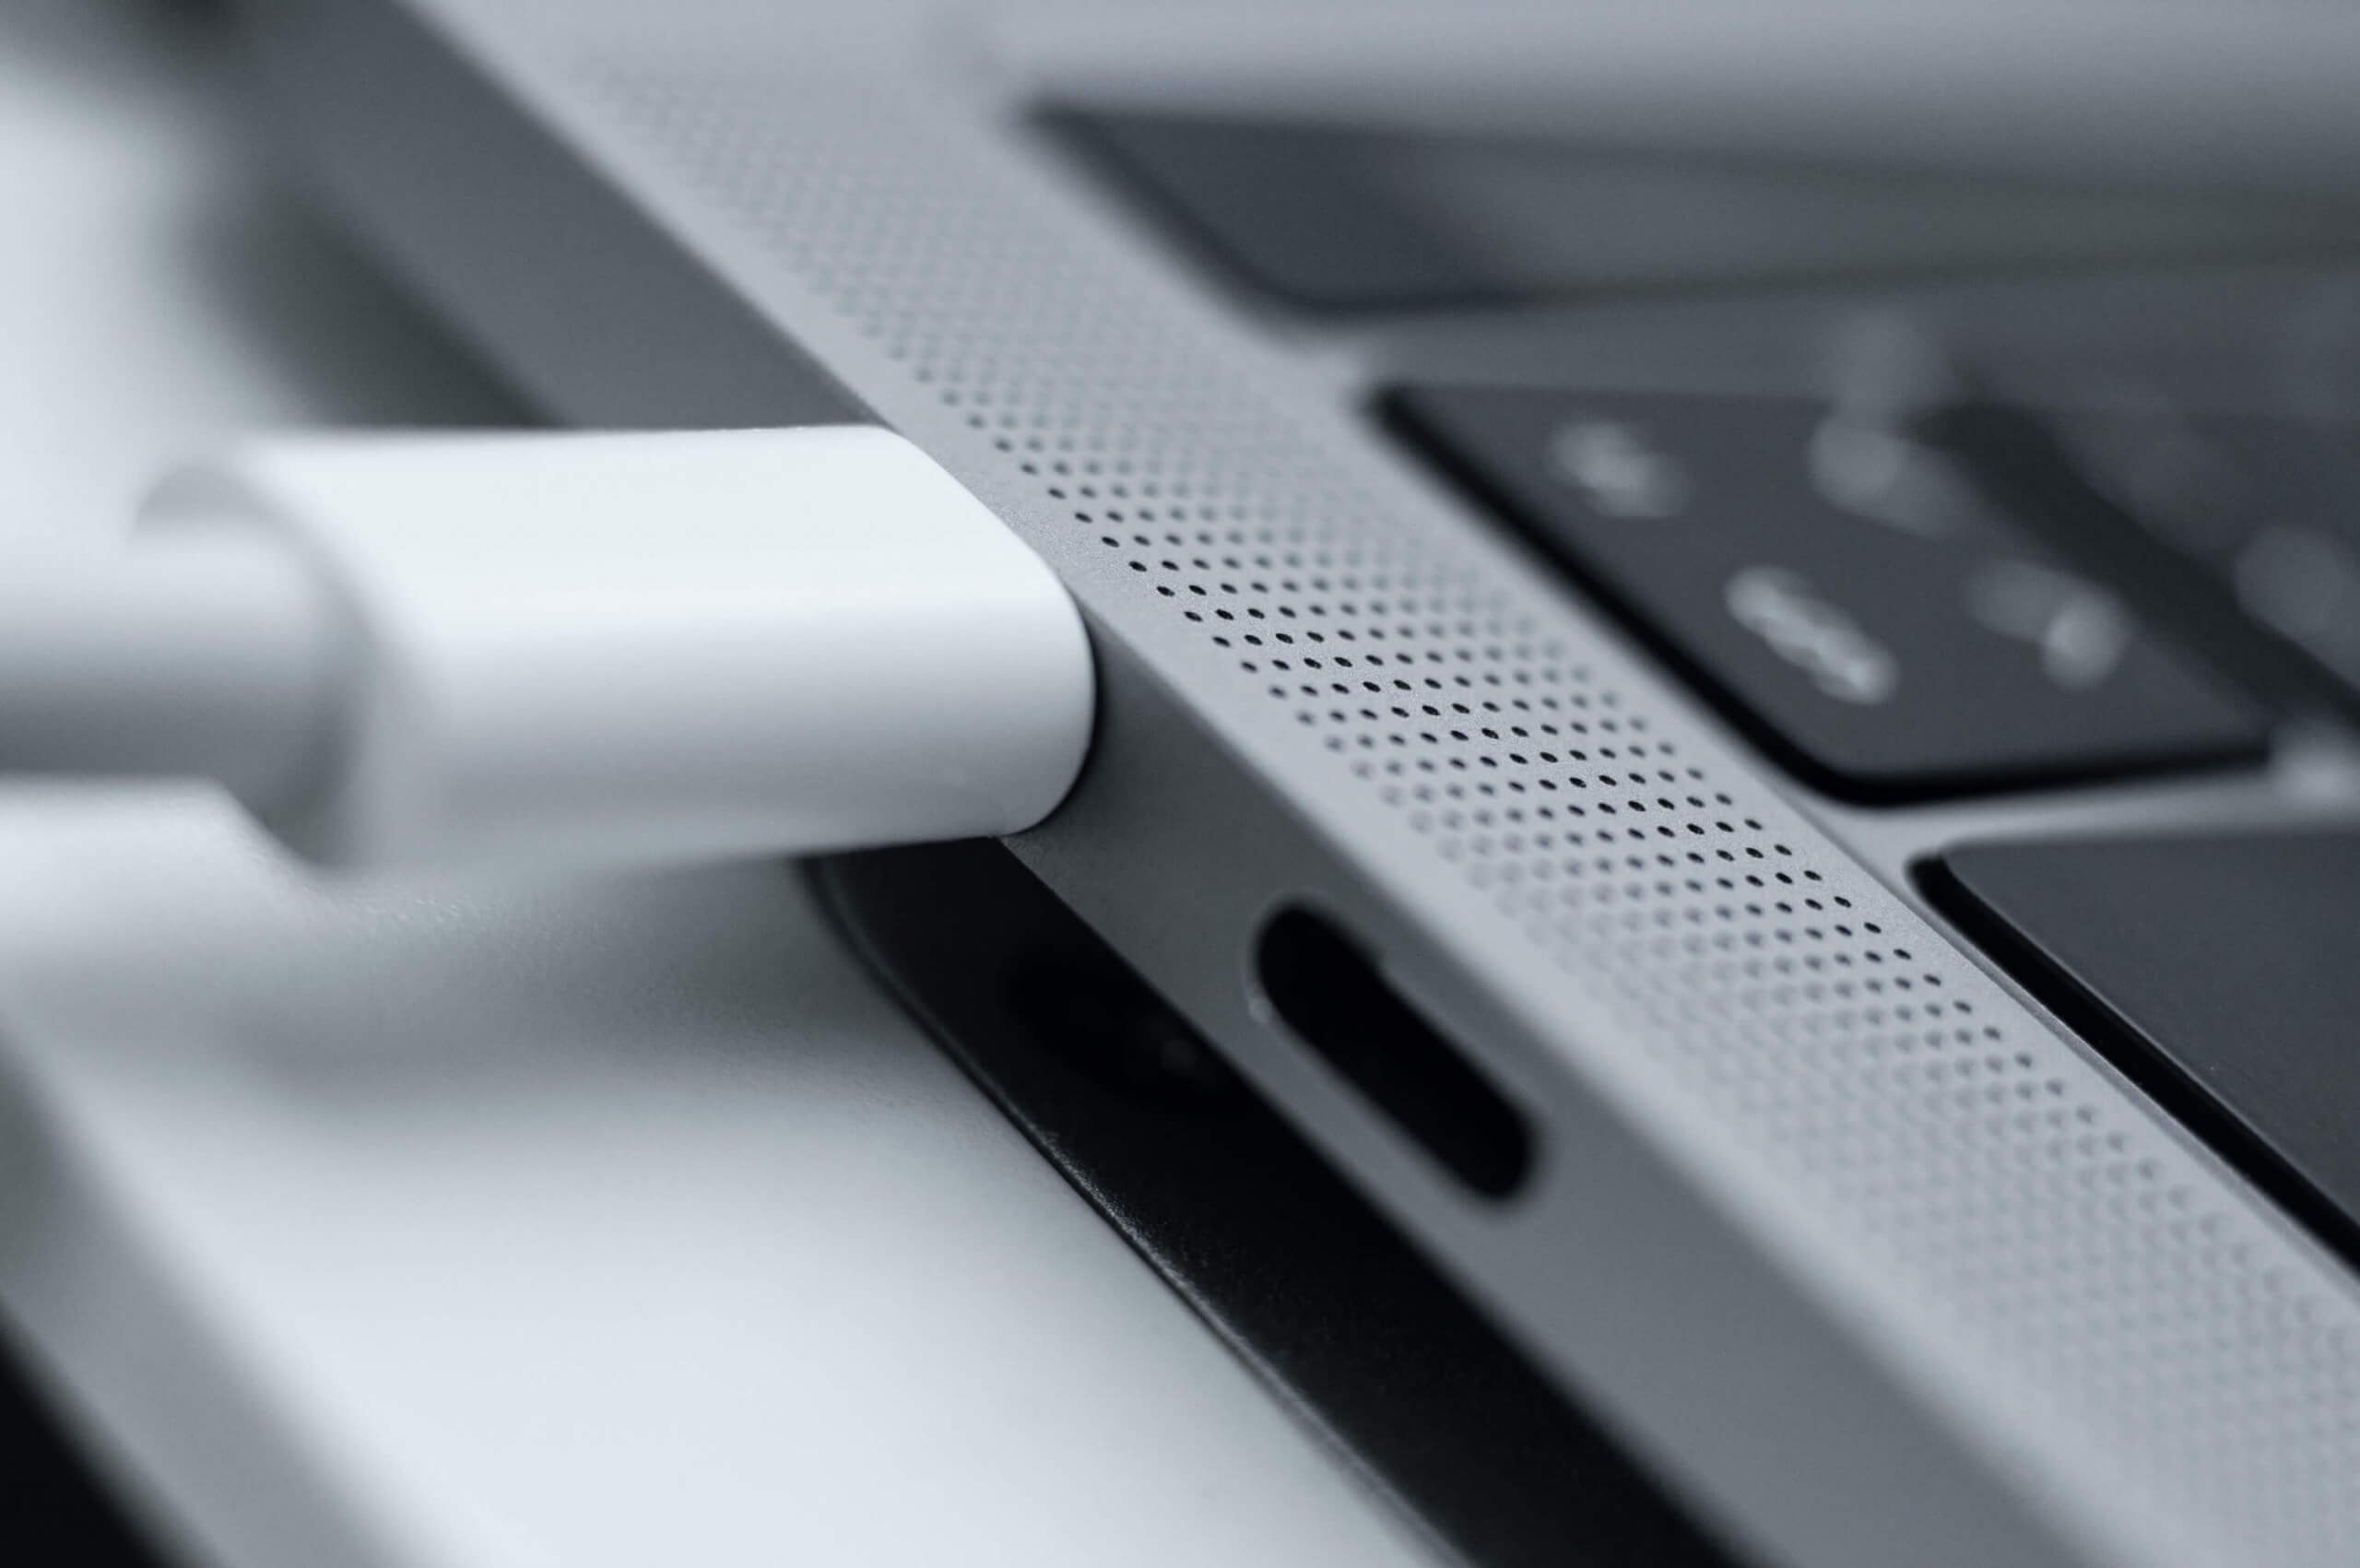 How to check your MacBook's battery health